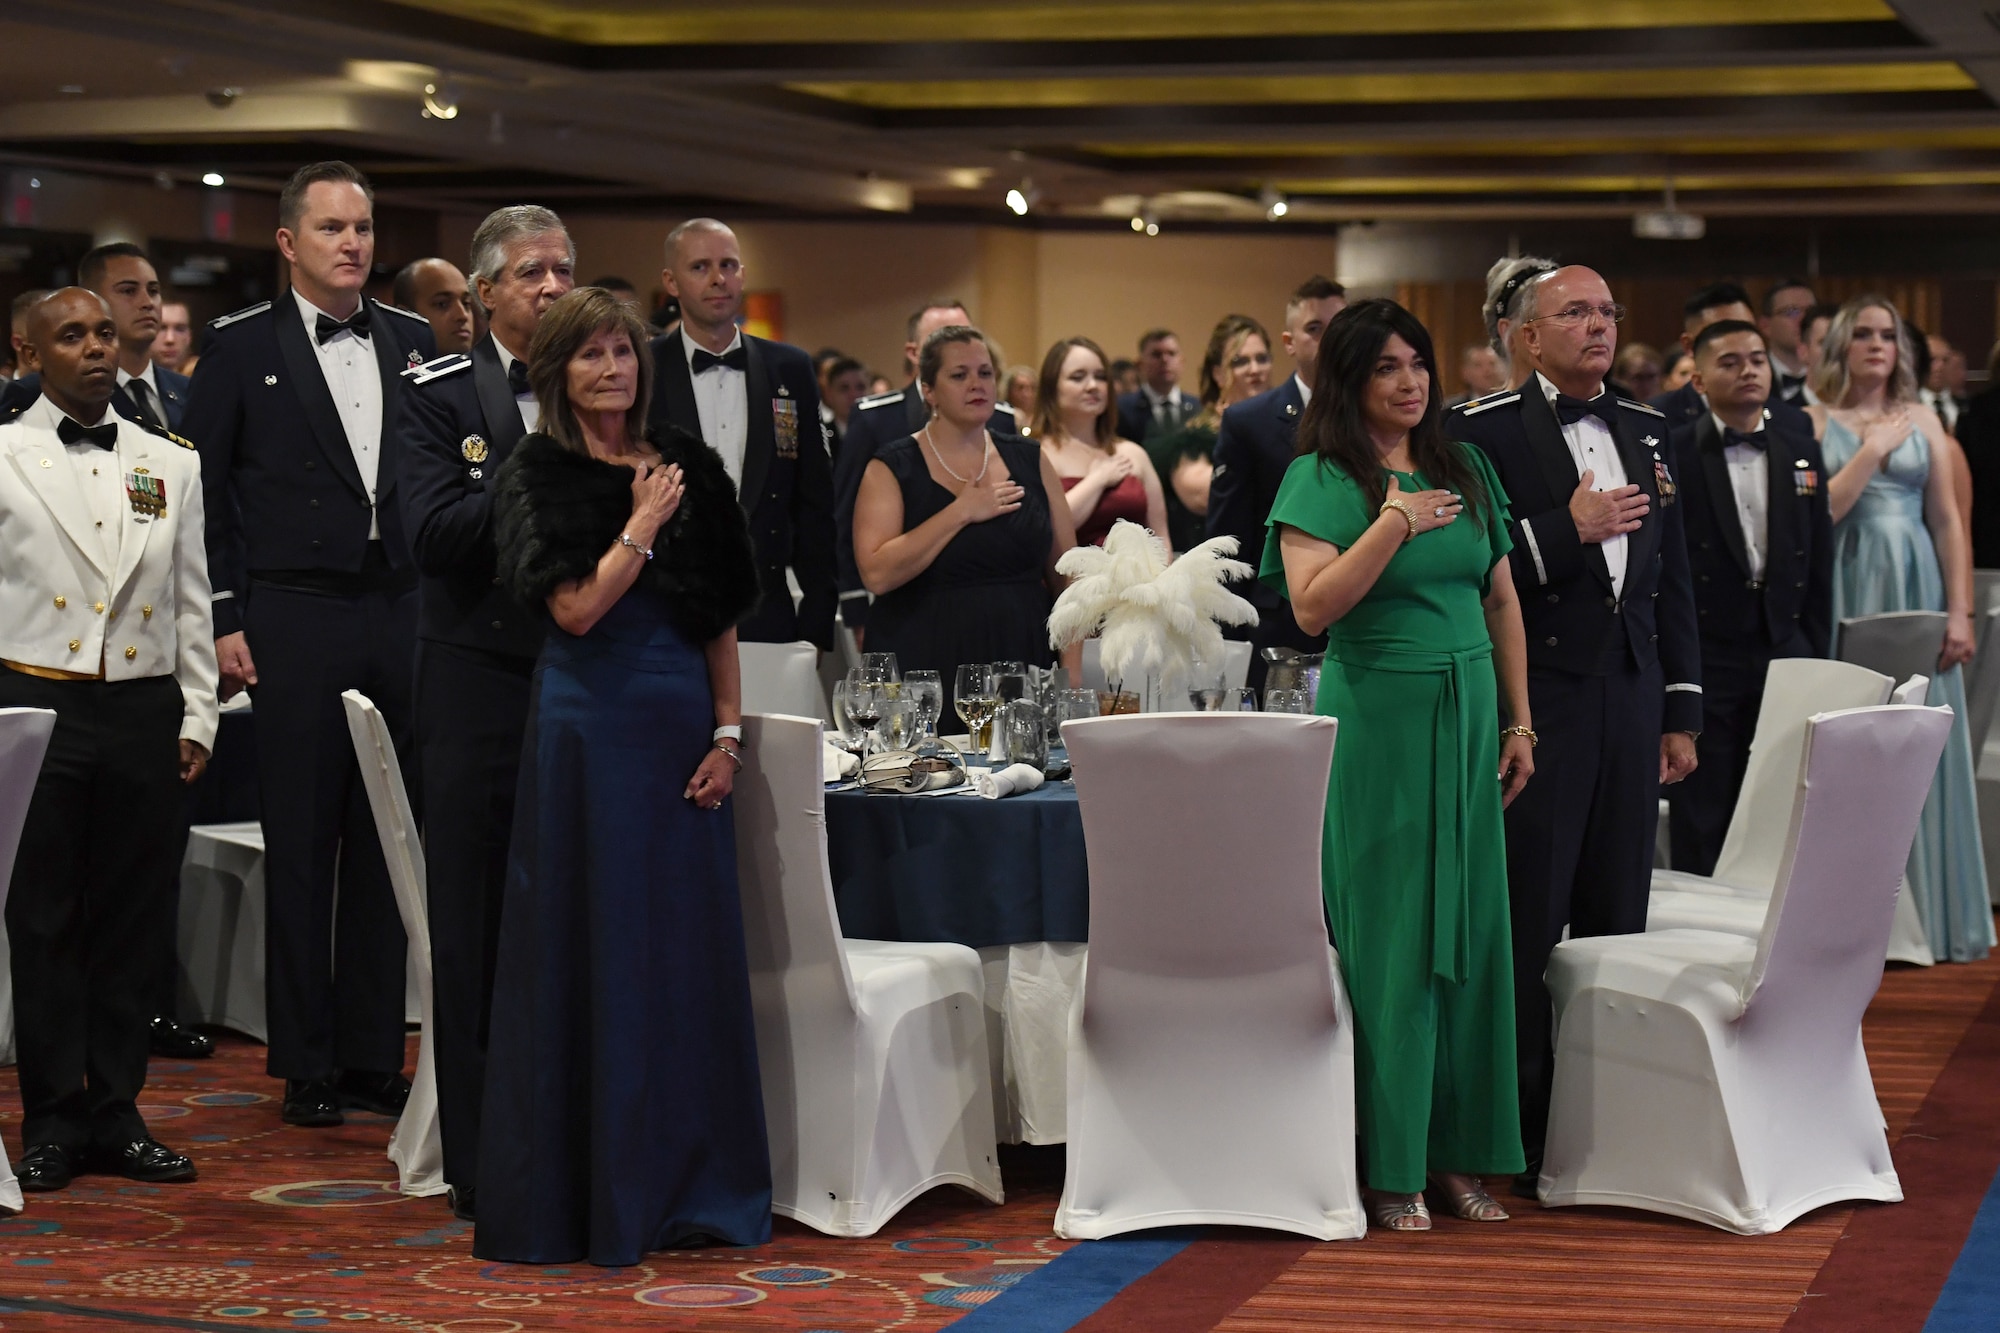 U.S. Air Force Col. William Hunter, 81st Training Wing commander, delivers a toast during the Keesler Air Force Ball inside the IP Casino Resort Spa at Biloxi, Mississippi, Sept. 17, 2022. The event, which celebrated the Air Force's 75th birthday, also included a cake cutting ceremony. (U.S. Air Force photo by Kemberly Groue)